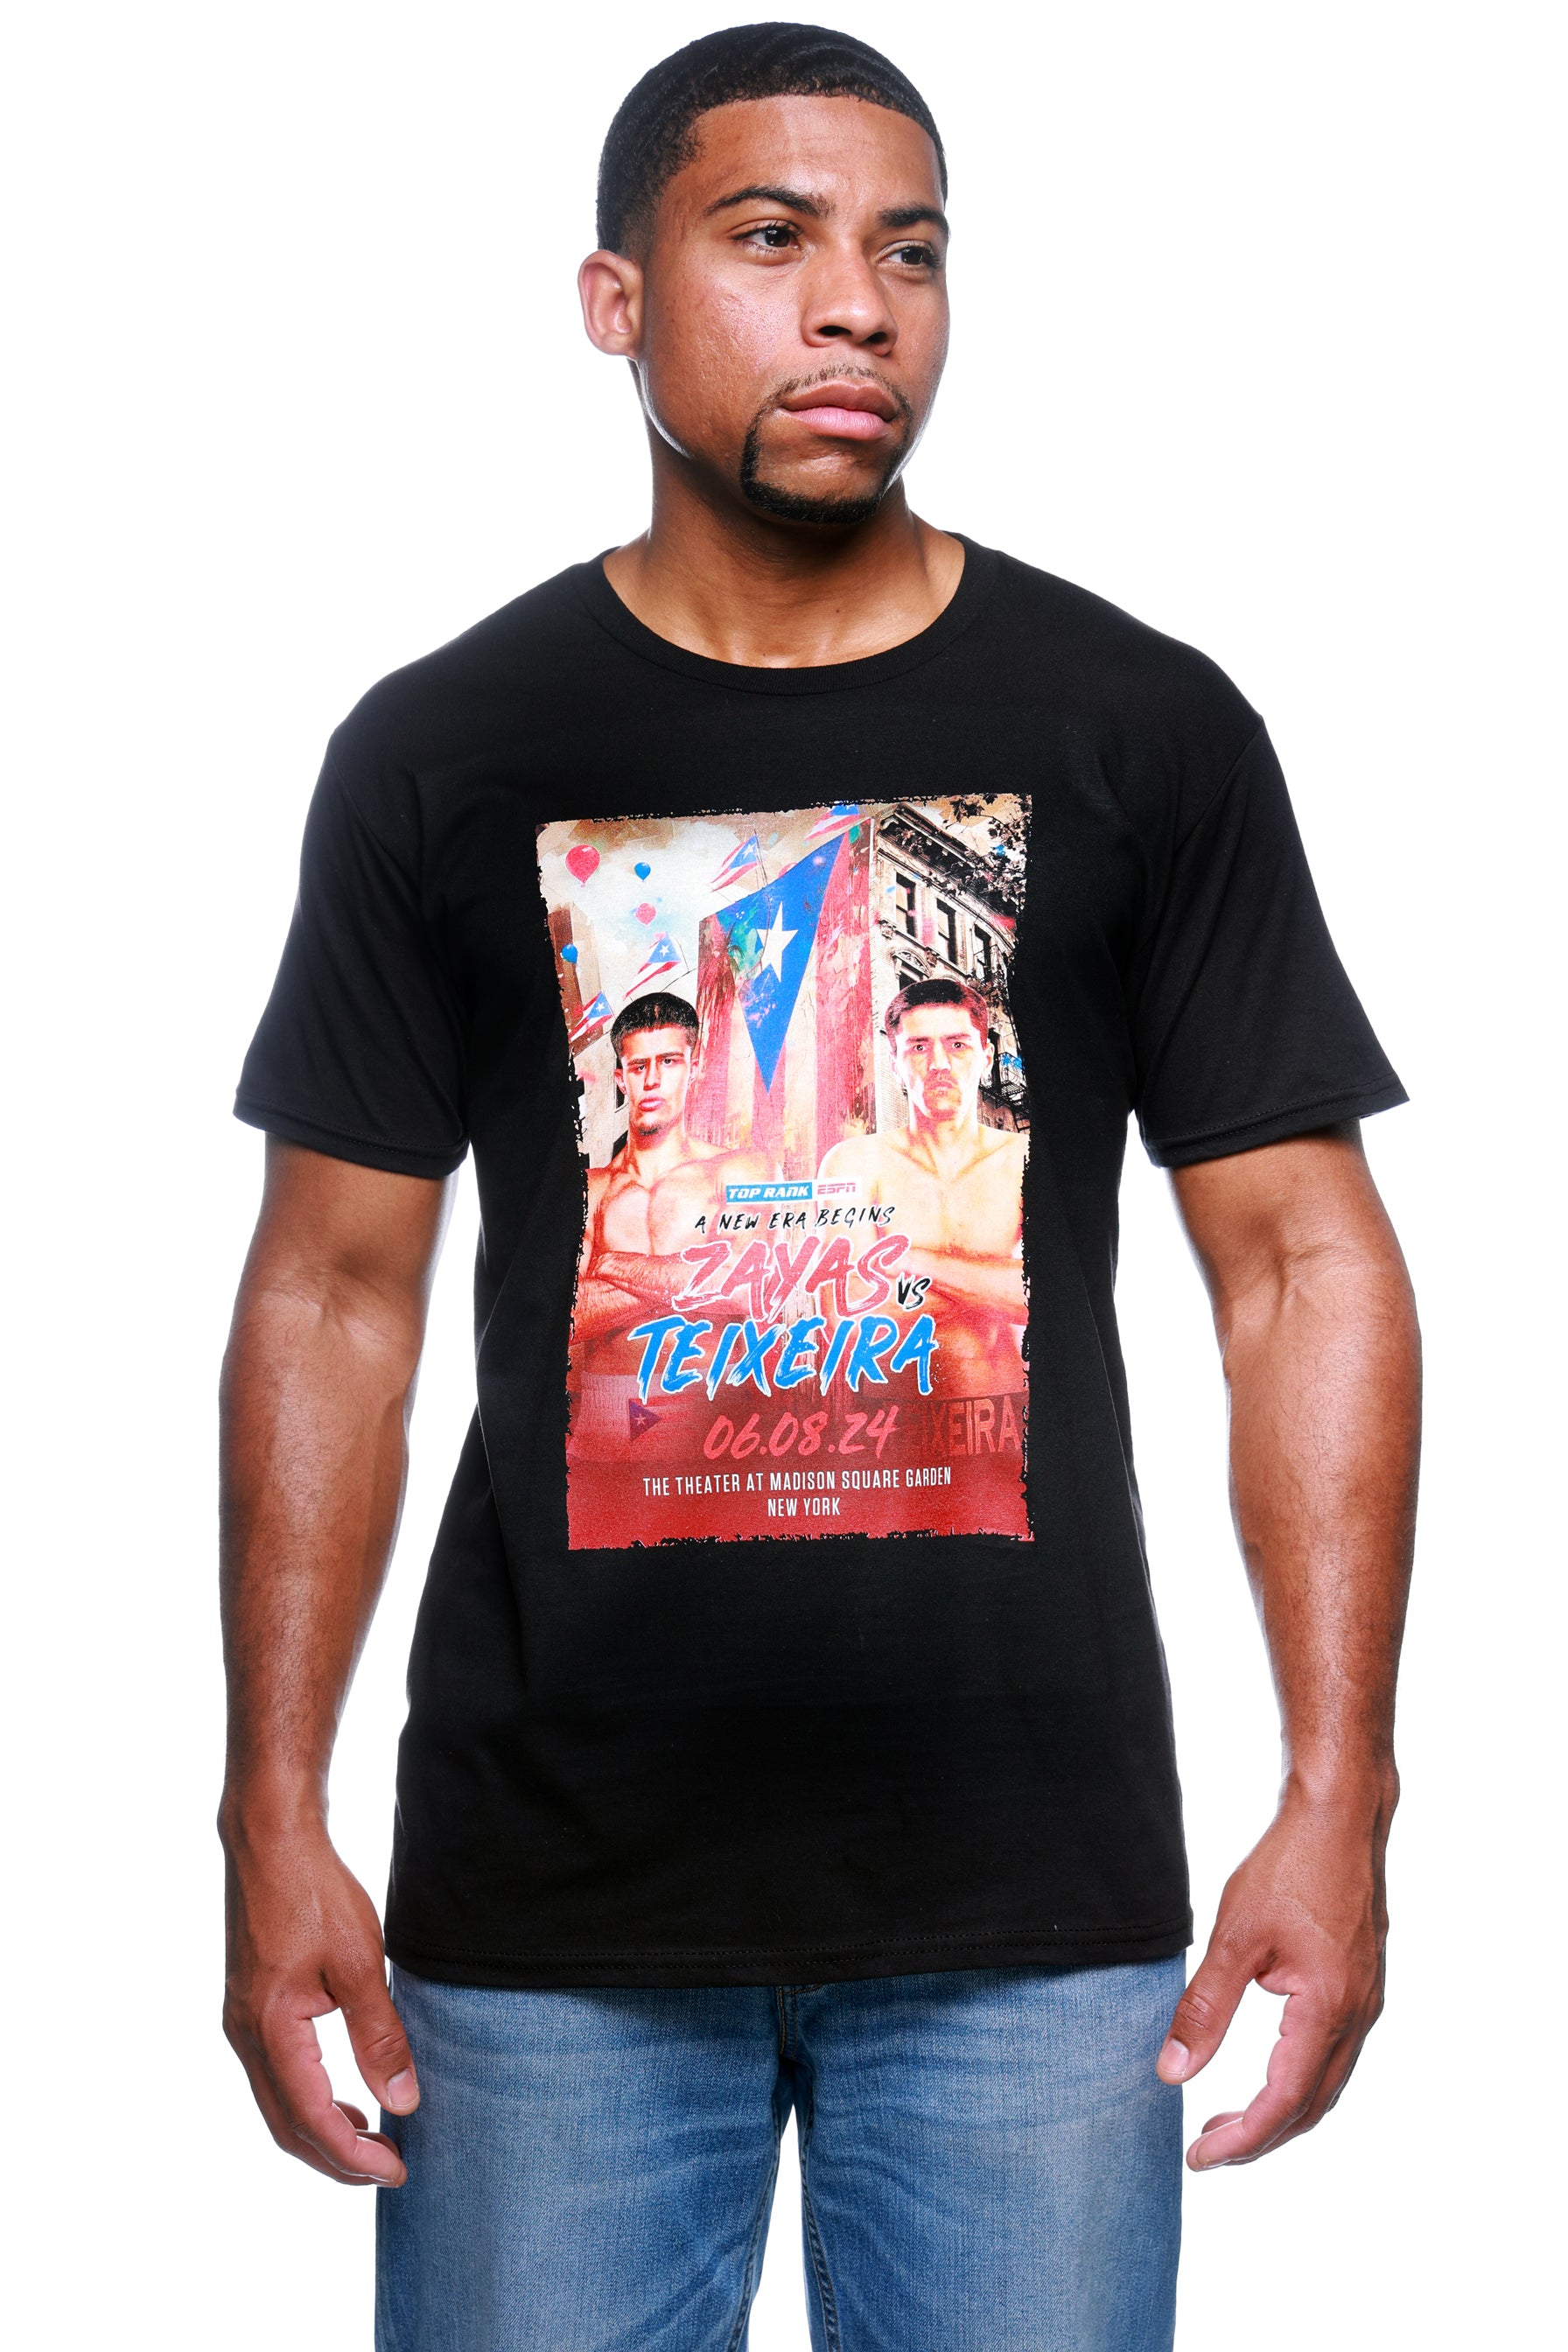 Xander Zayas Event T-Shirt featuring a vibrant full-color design commemorating his June 8 fight.